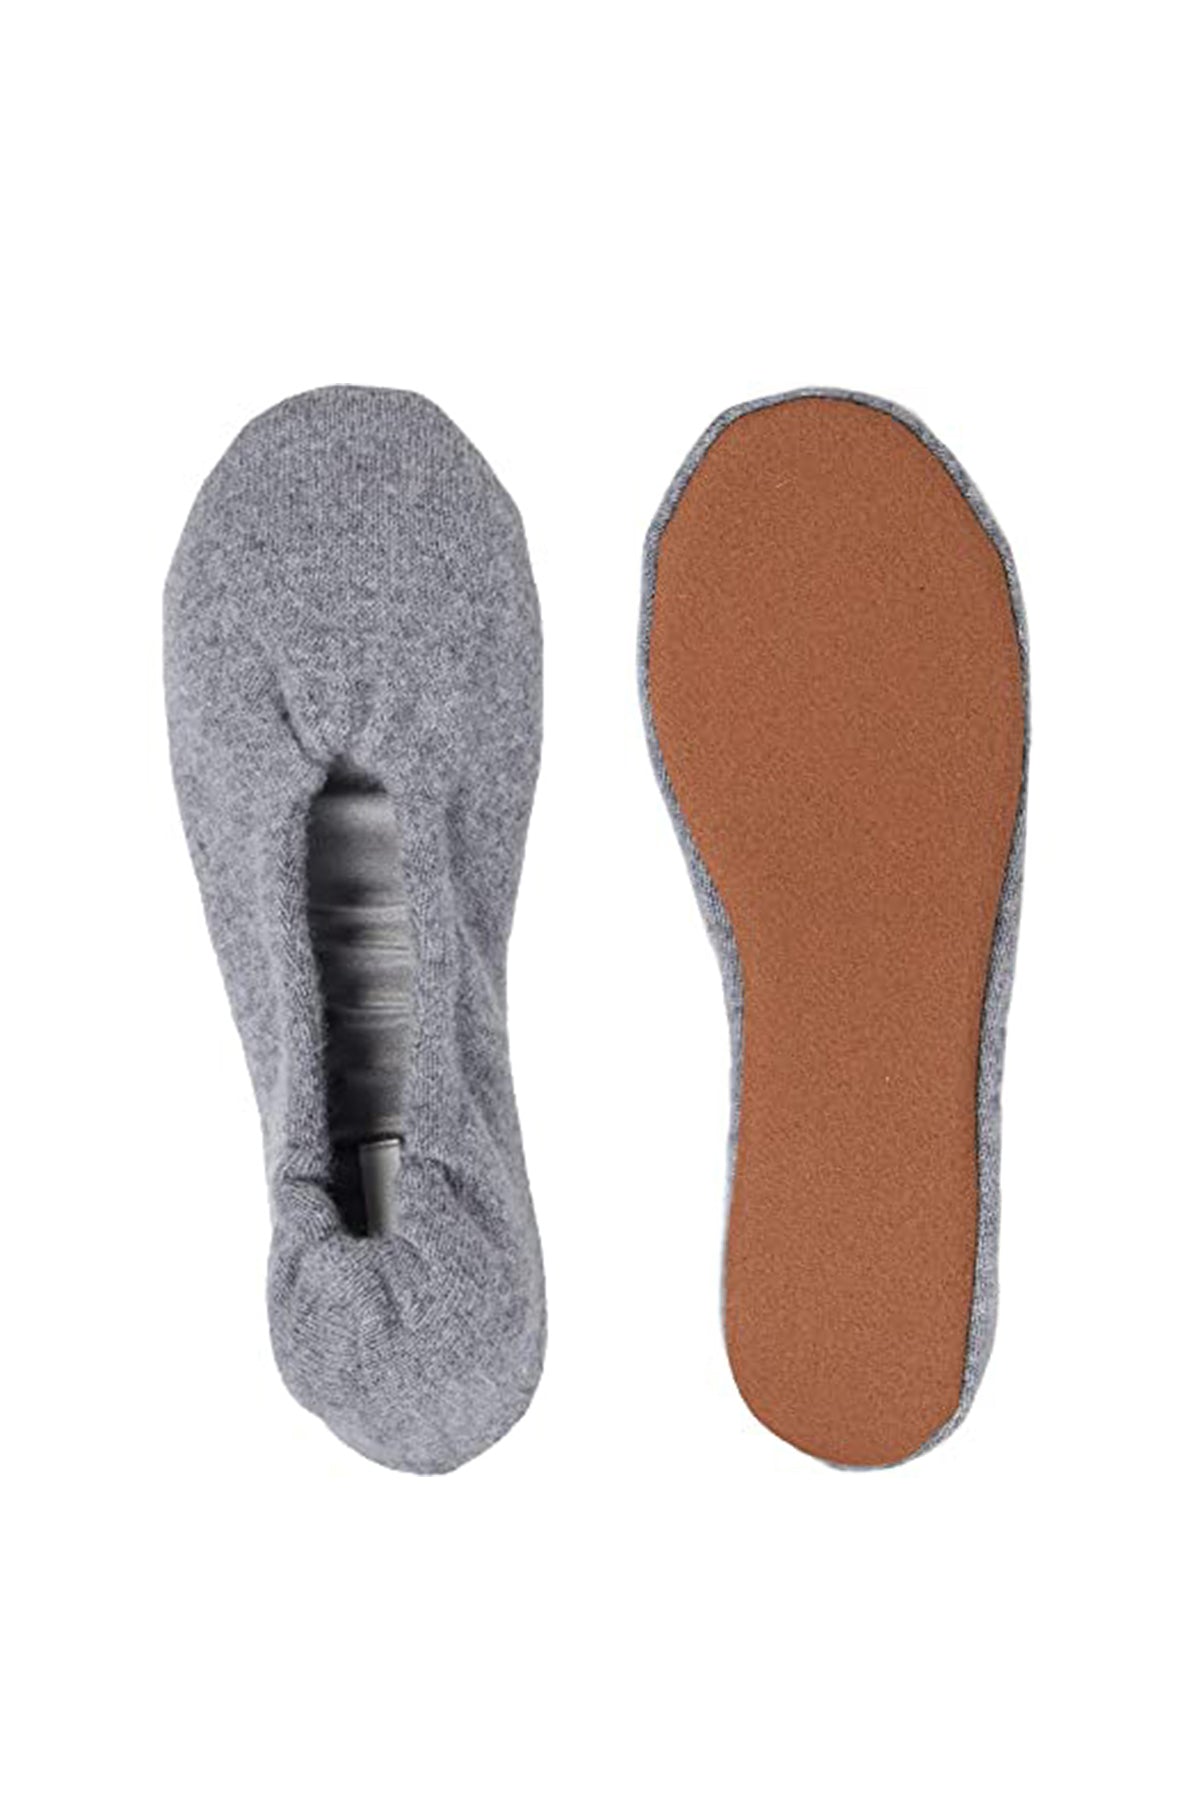   CASHMERE BALLET FLAT SLIPPERS BY SKIN 